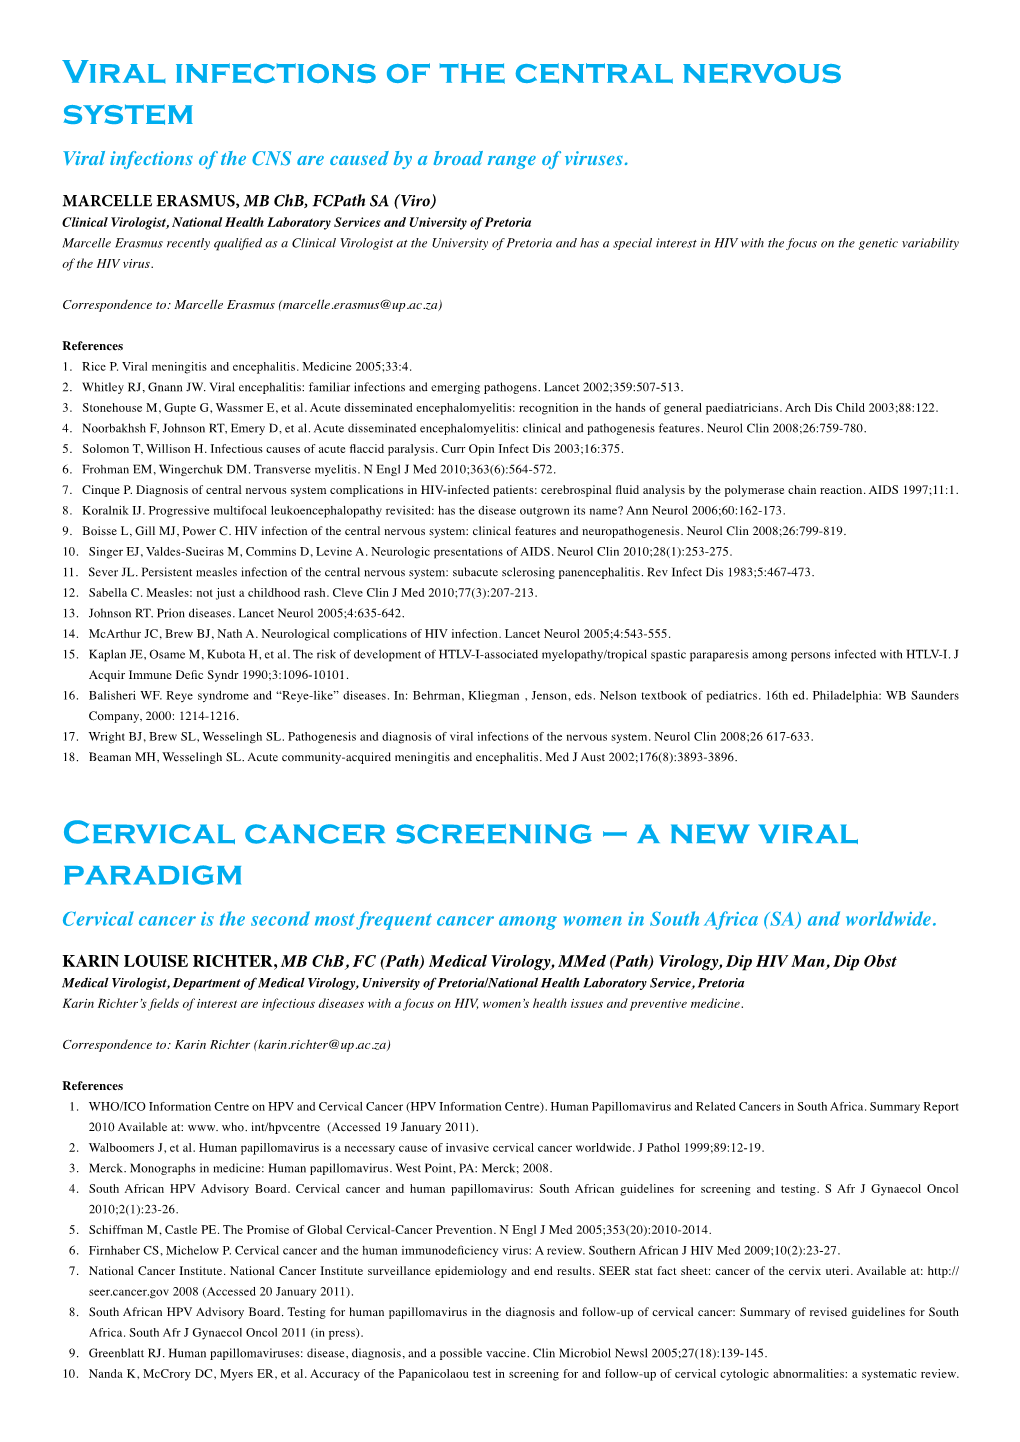 Viral Infections of the Central Nervous System Cervical Cancer Screening